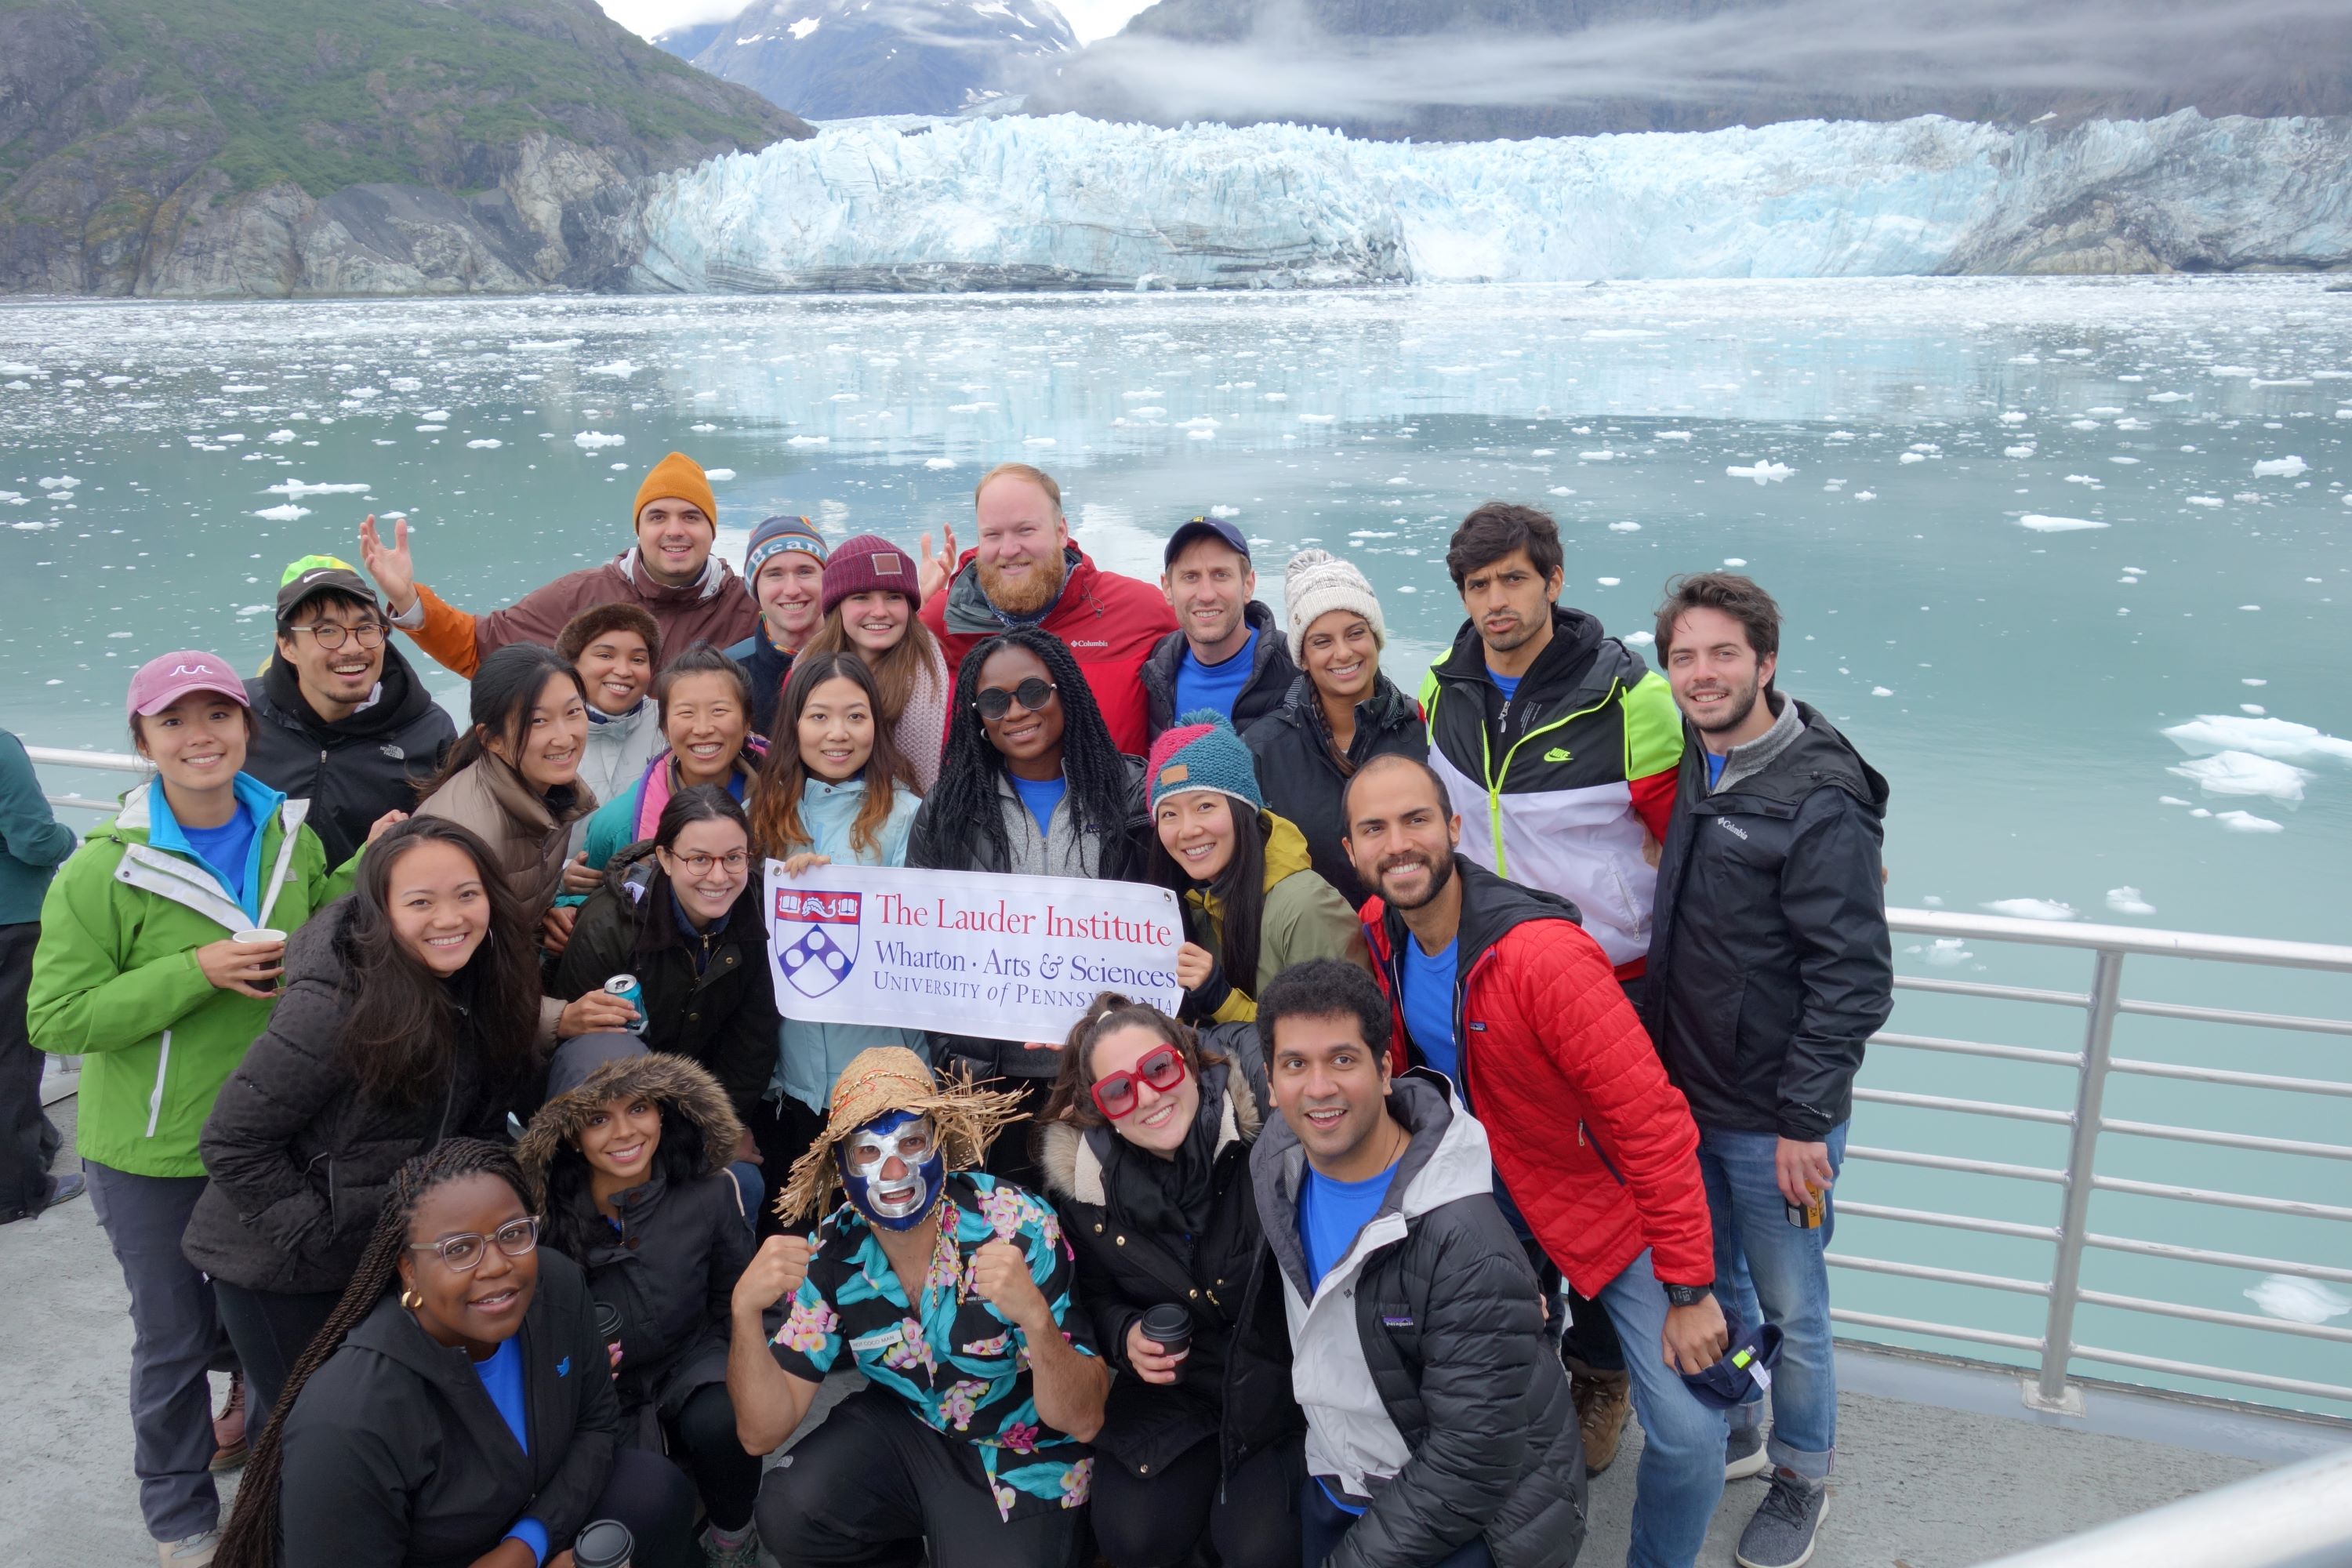 Group photo of students on a boat in Glacier Bay